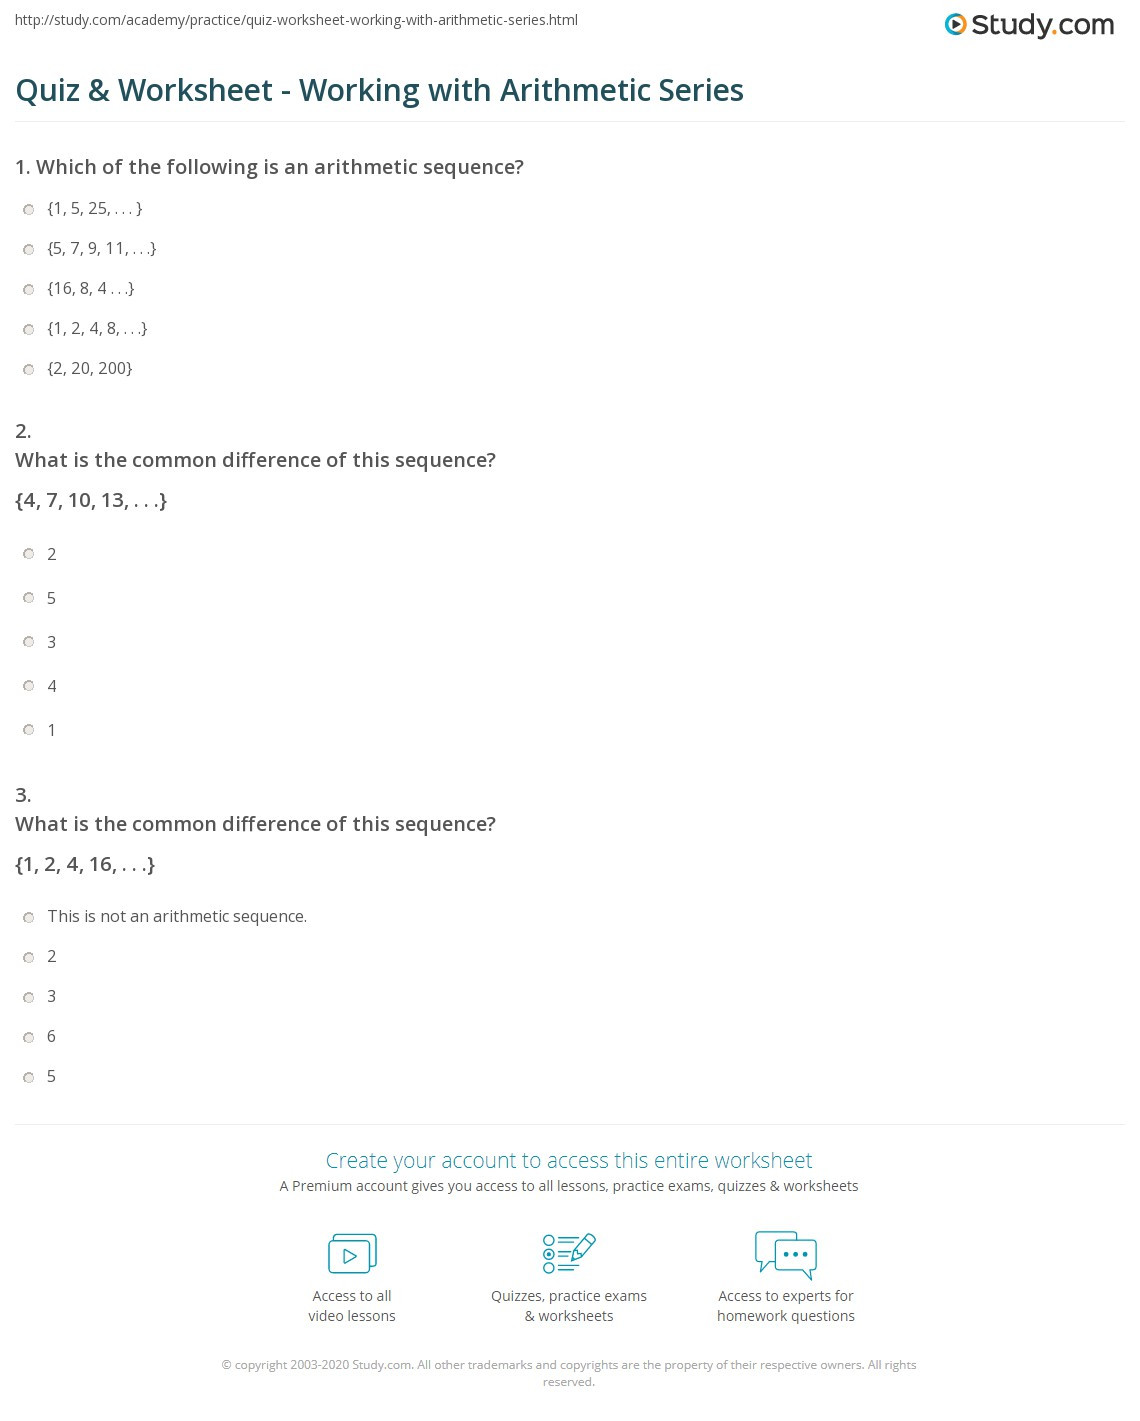 Geometric Sequence Worksheet Answers Arithmetic Series Worksheet with Answers Pdf